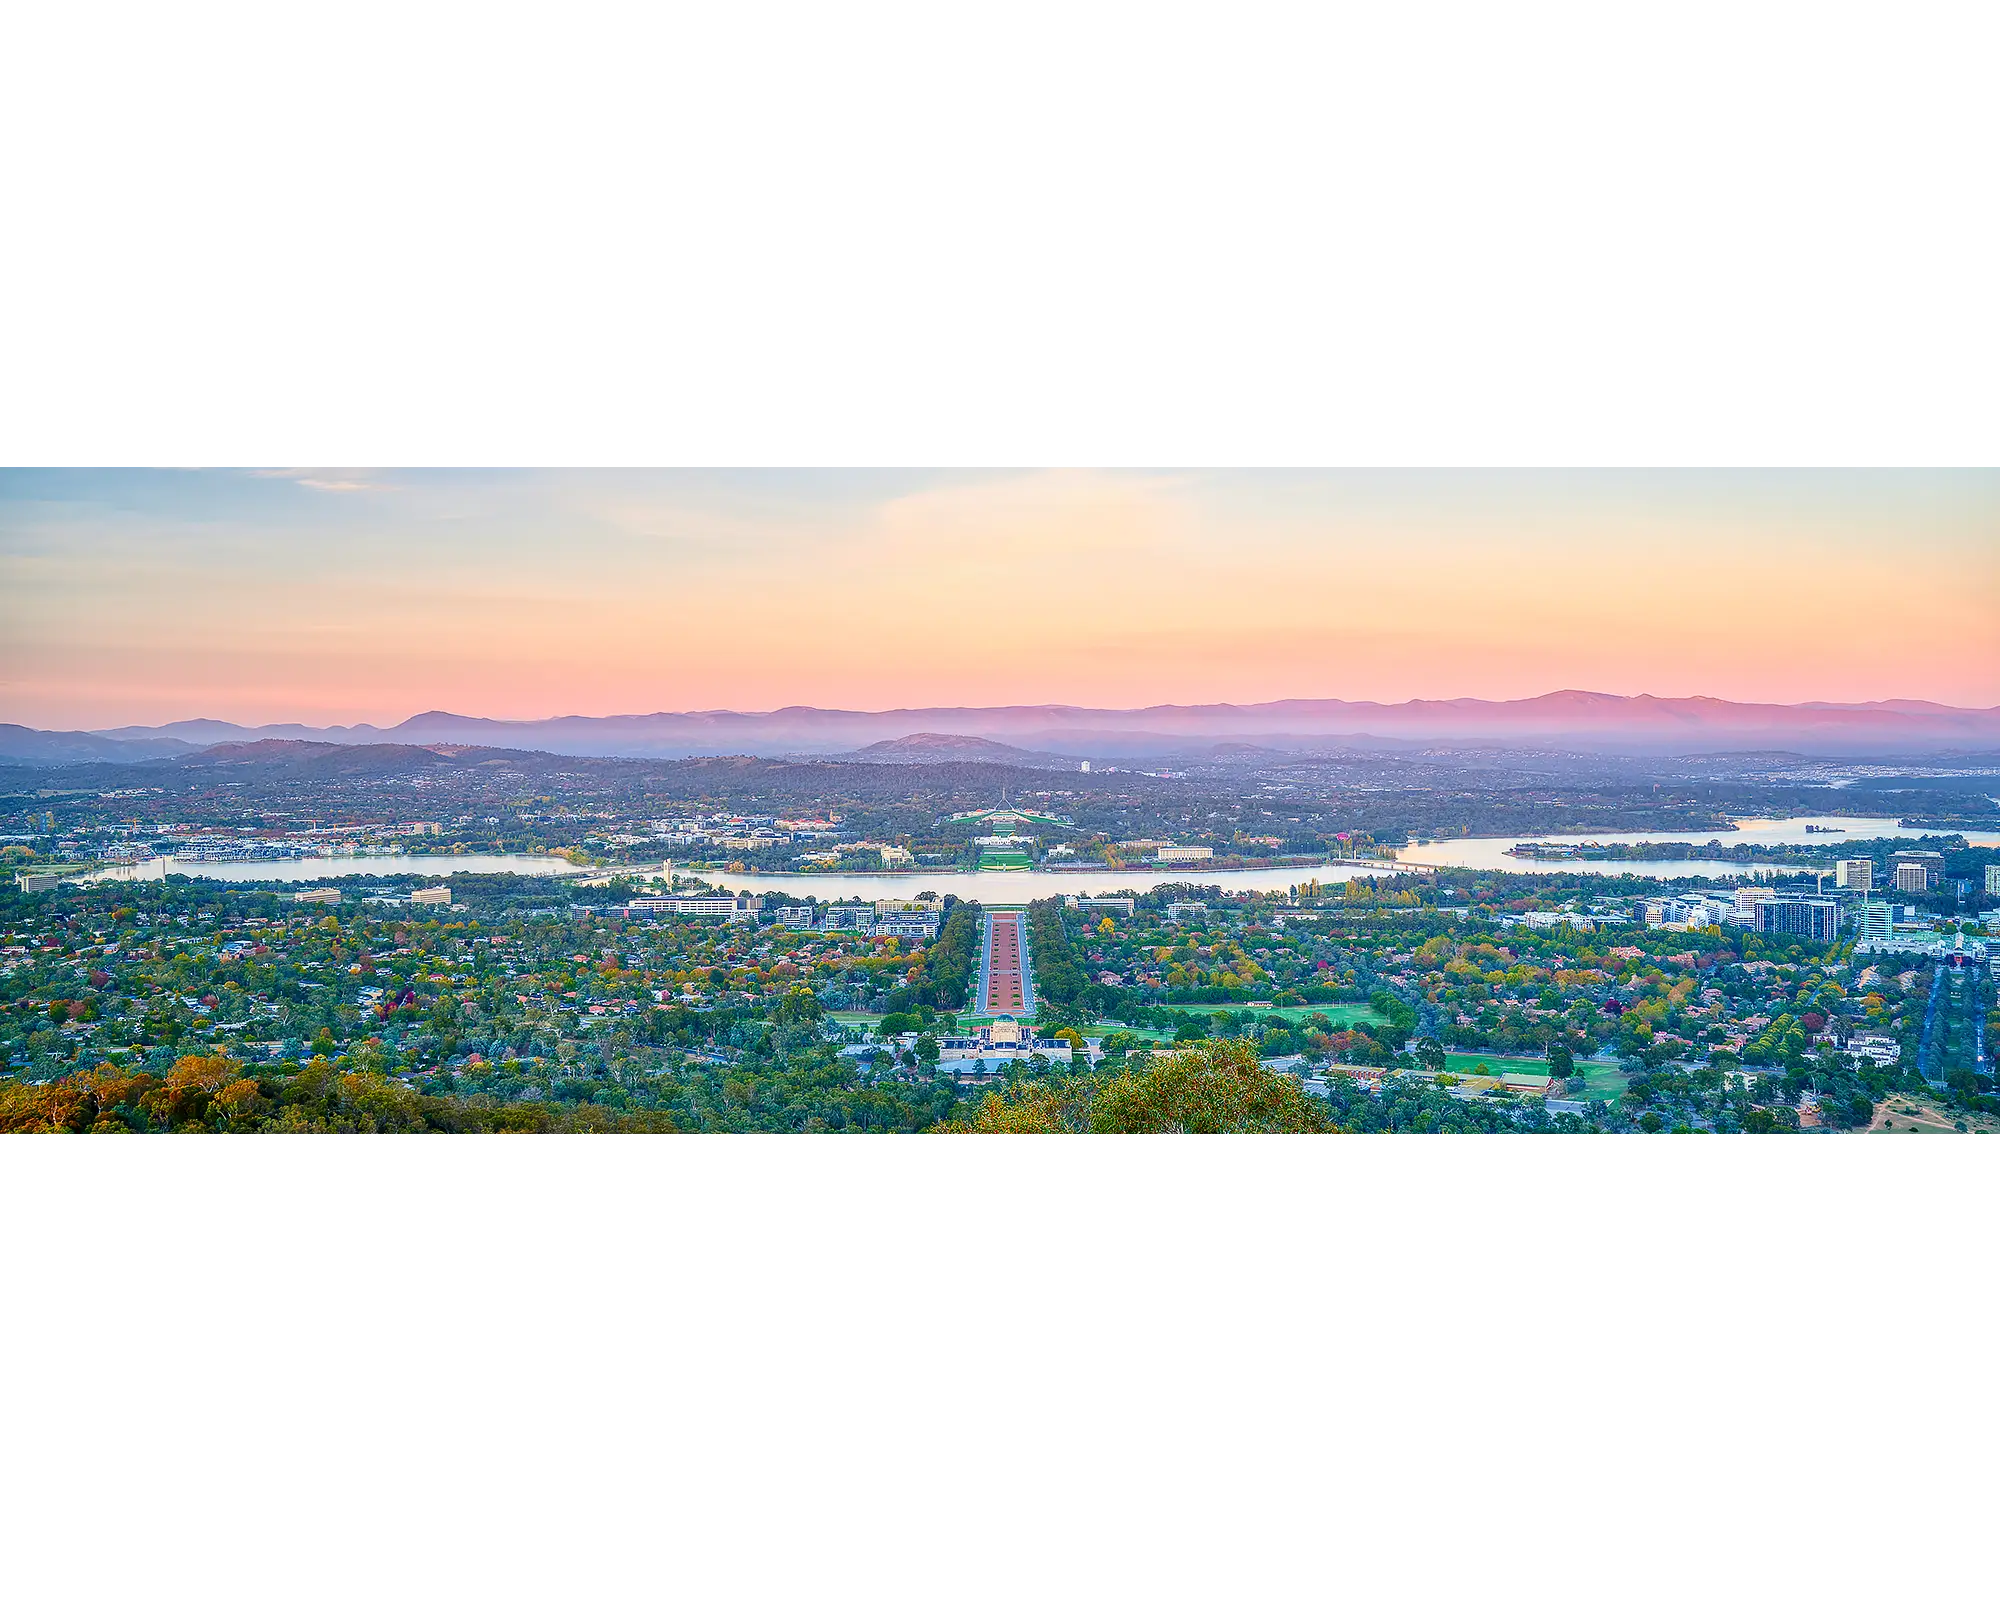 Marions View. Sunrise over Canberra from the top of Mount Ainslie.